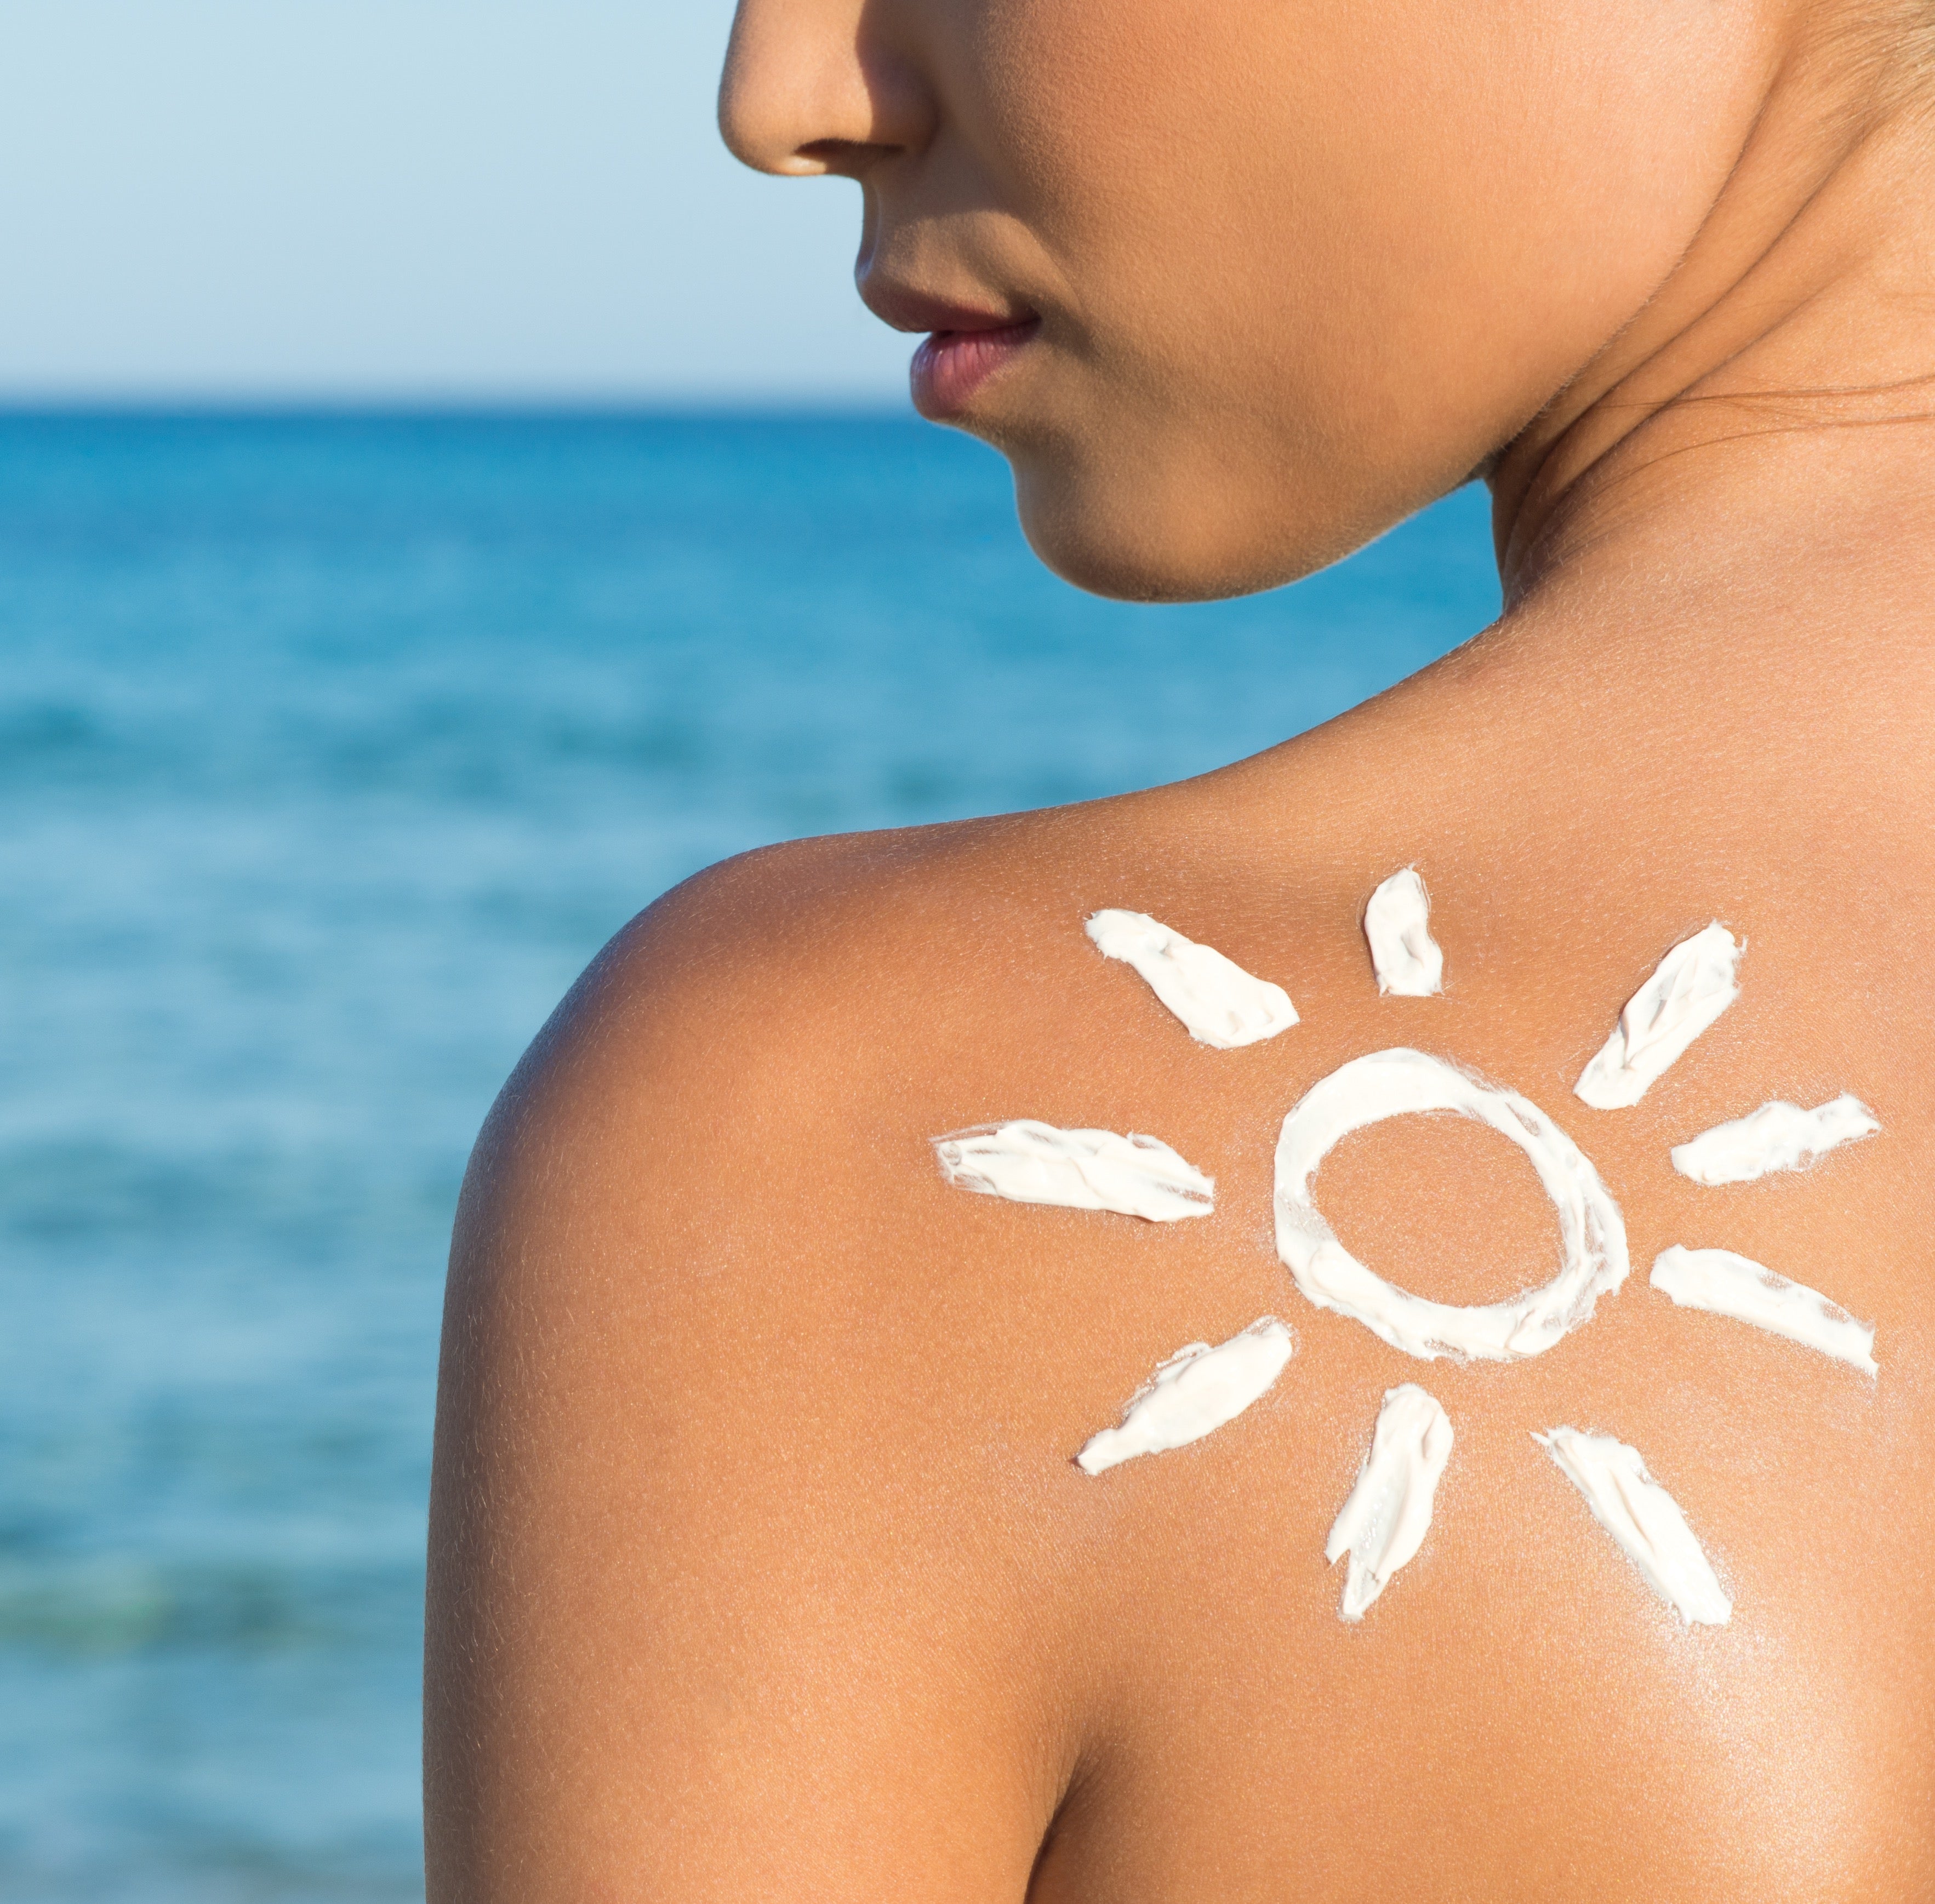 5 Ways To Get Great Summer Skin, Naturally